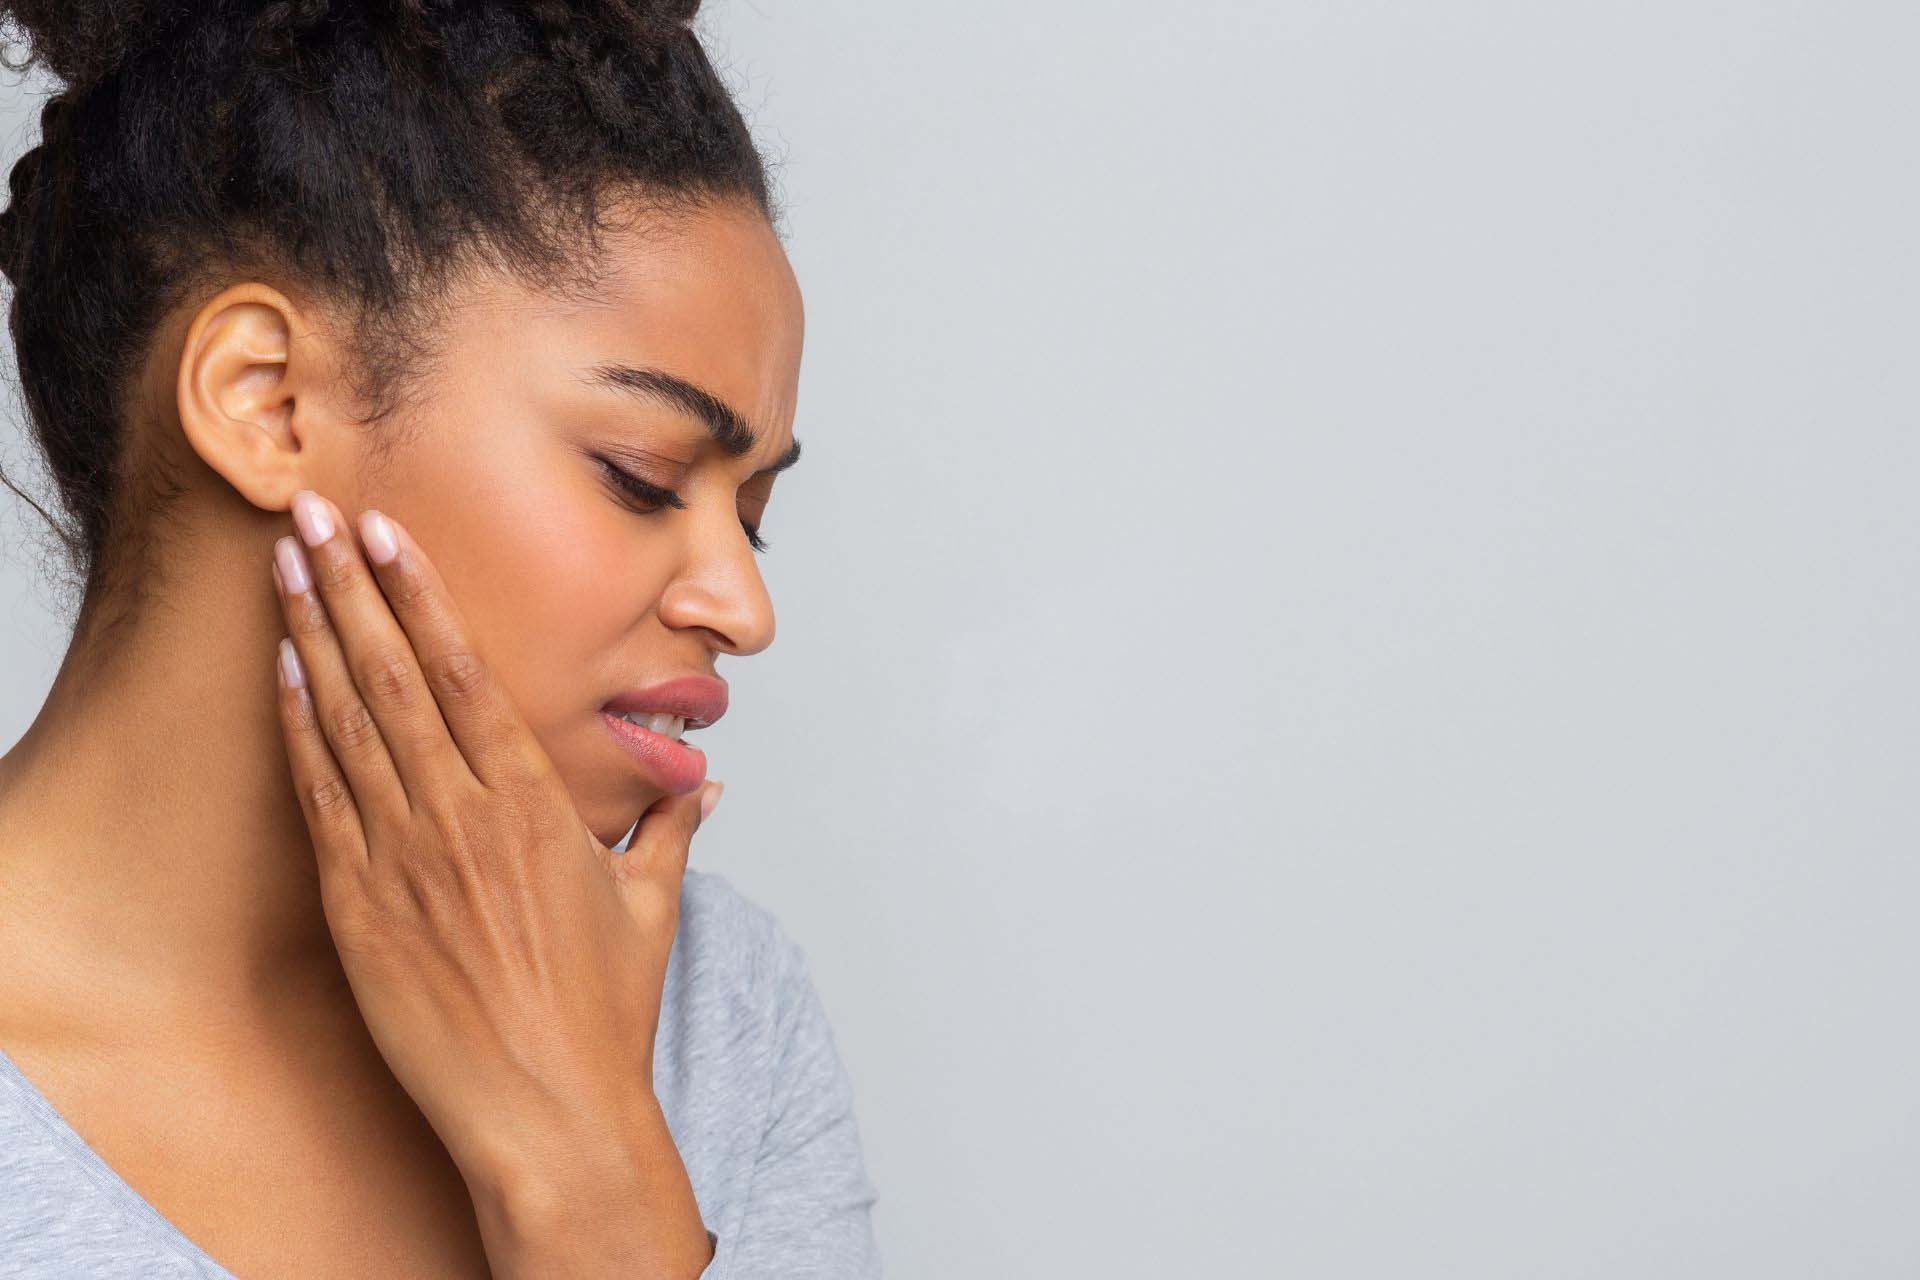 Woman holding jaw due to joint pain by her ears as she sees a TMJ specialist, Dr. Hakim near Beverly Grove, Los Angeles, who is treating TMJ for her.